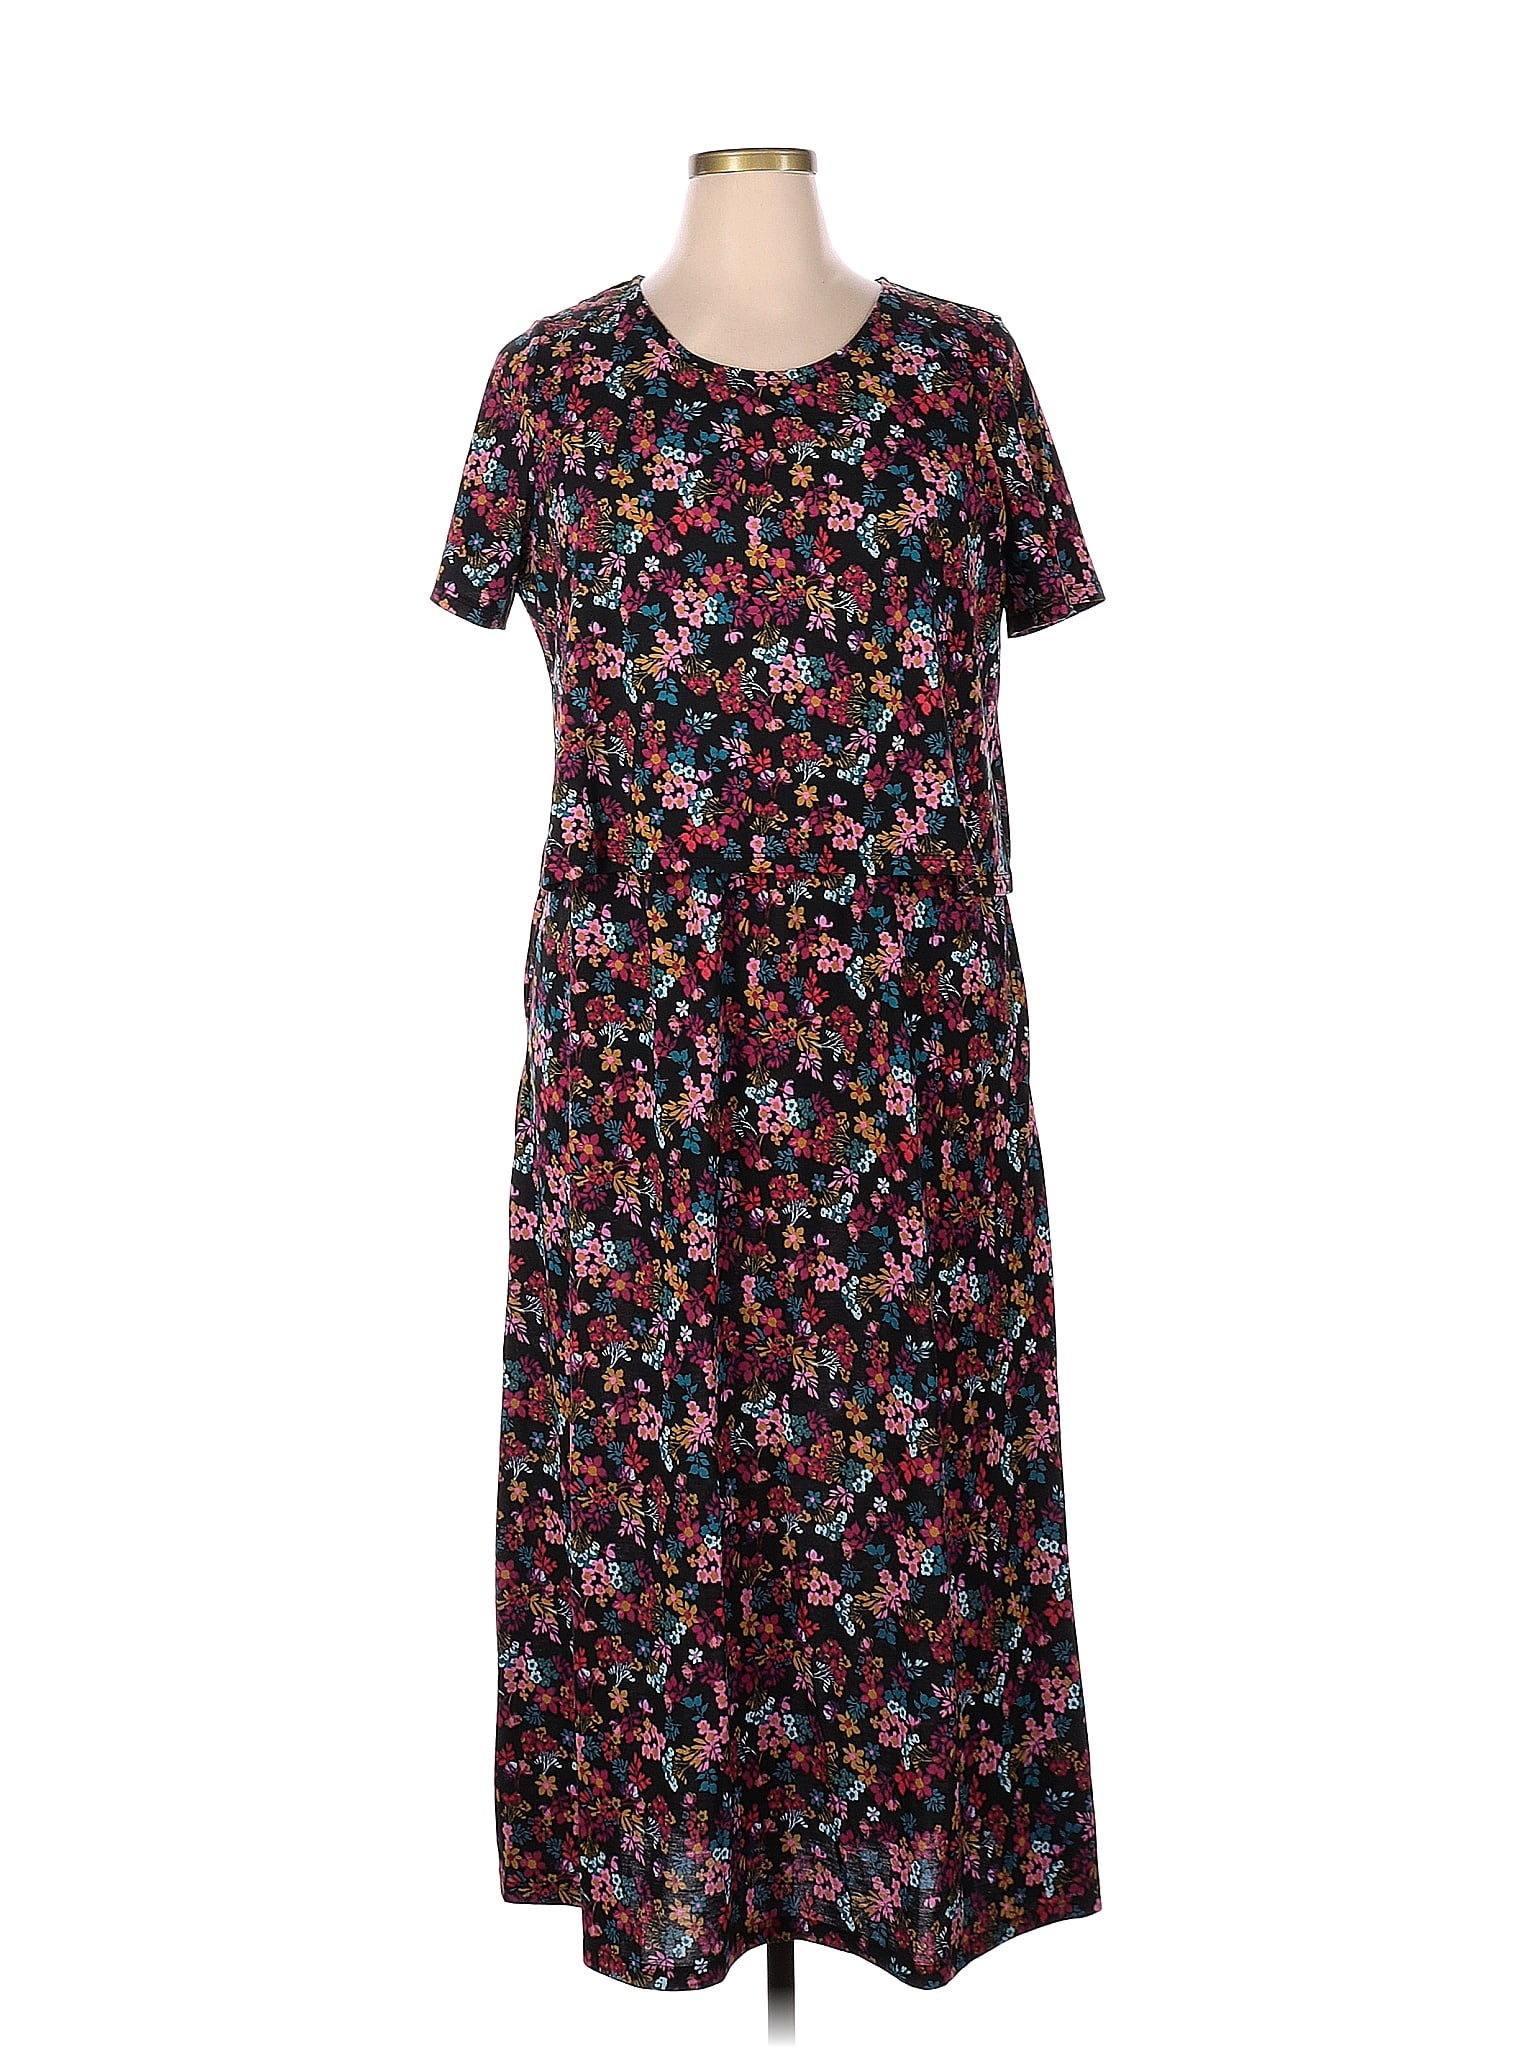 Woman Within Floral Multi Color Black Casual Dress Size 14 (M) - 67% ...